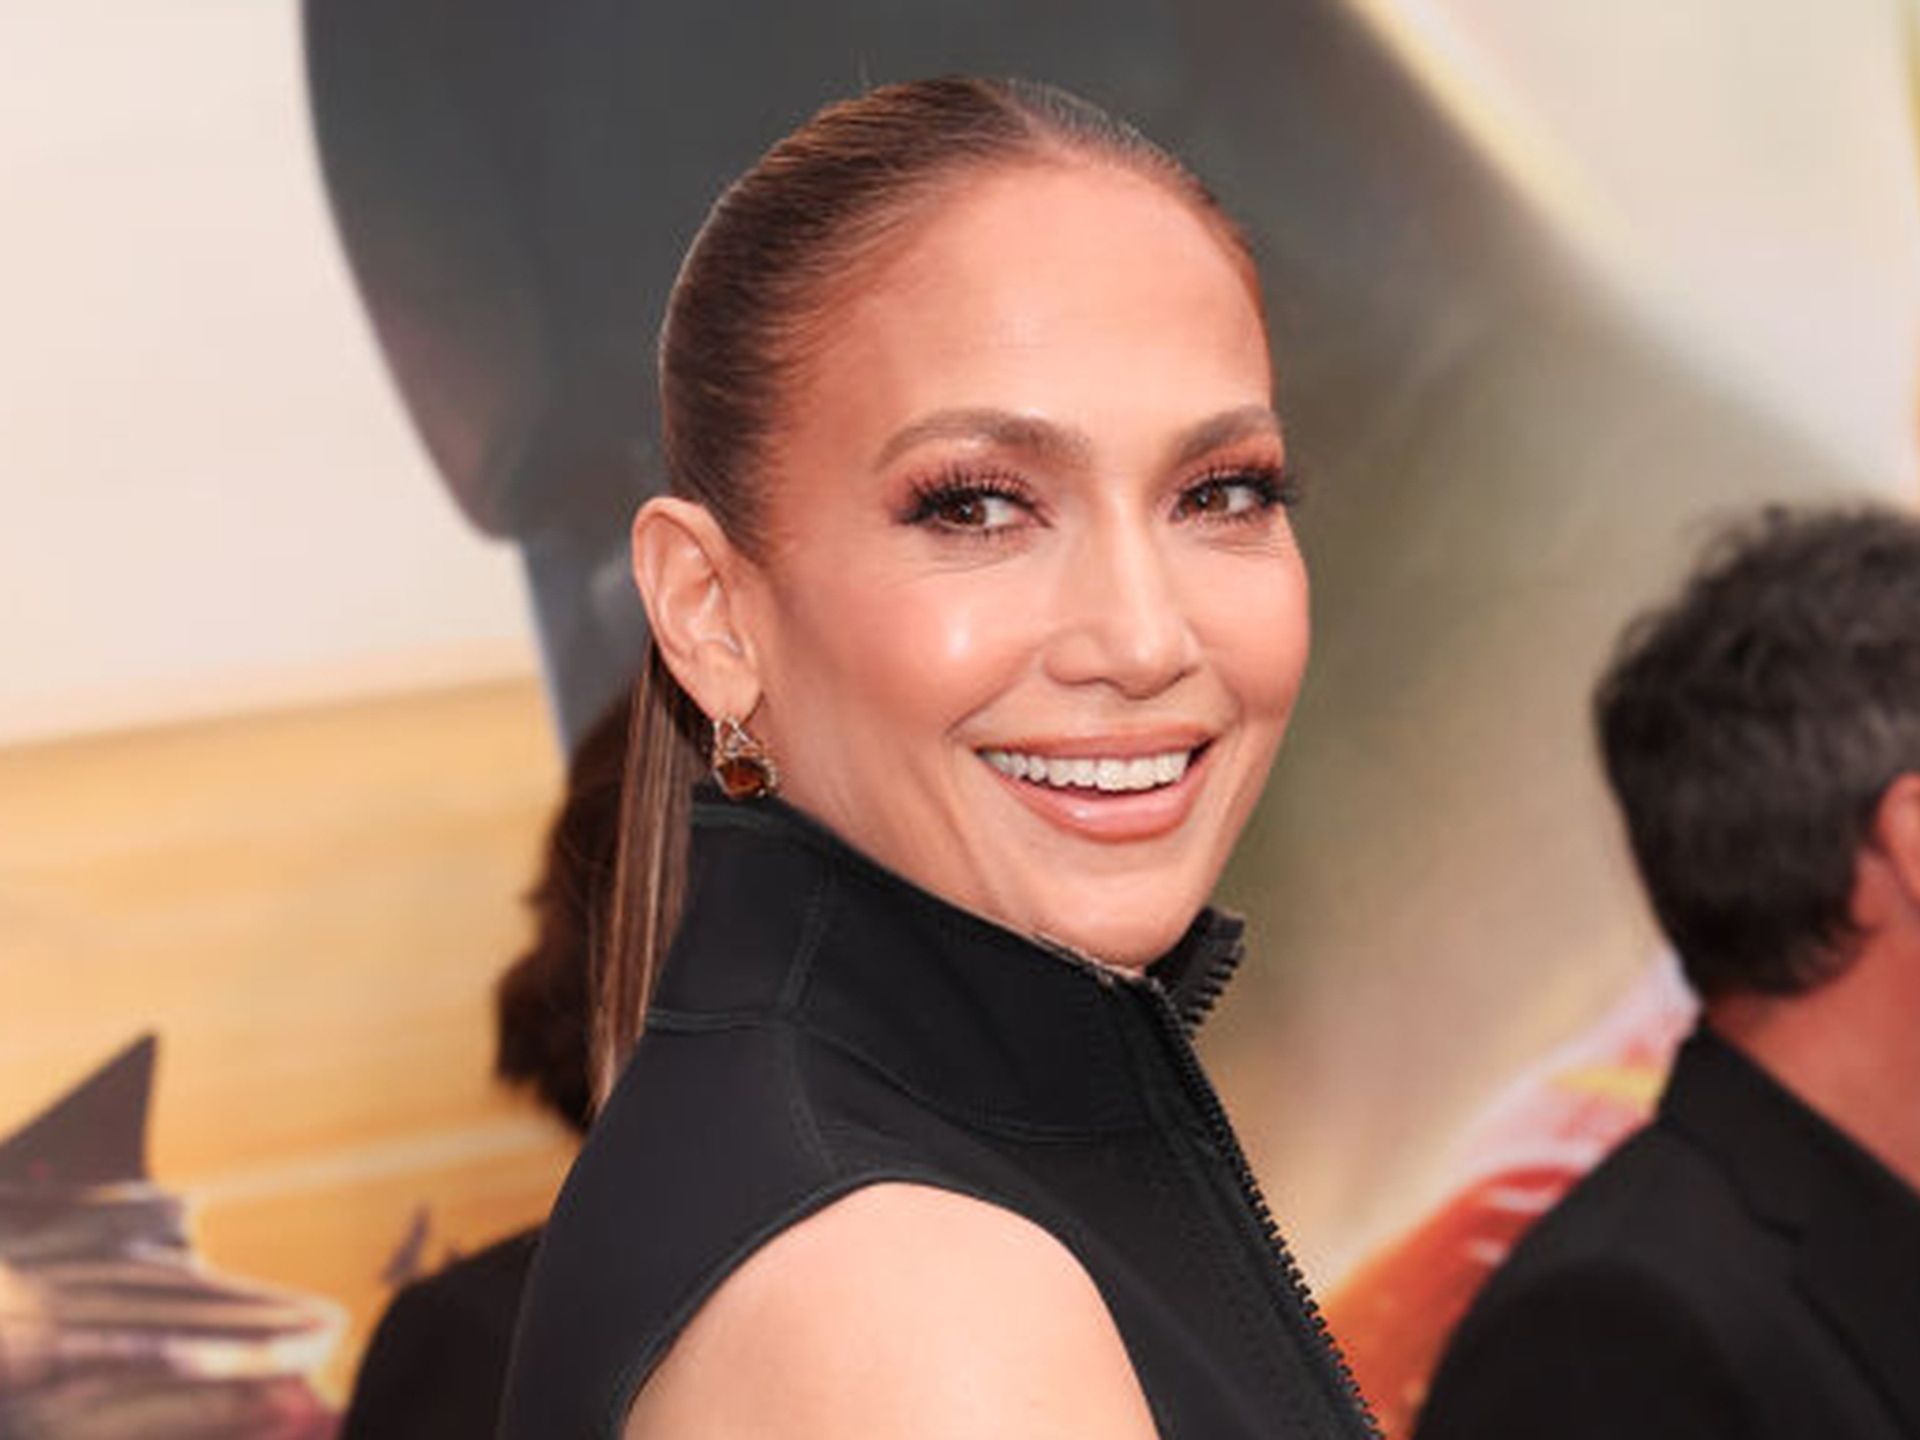 Jennifer Lopez stuns in hot pink lace underwear in exciting career